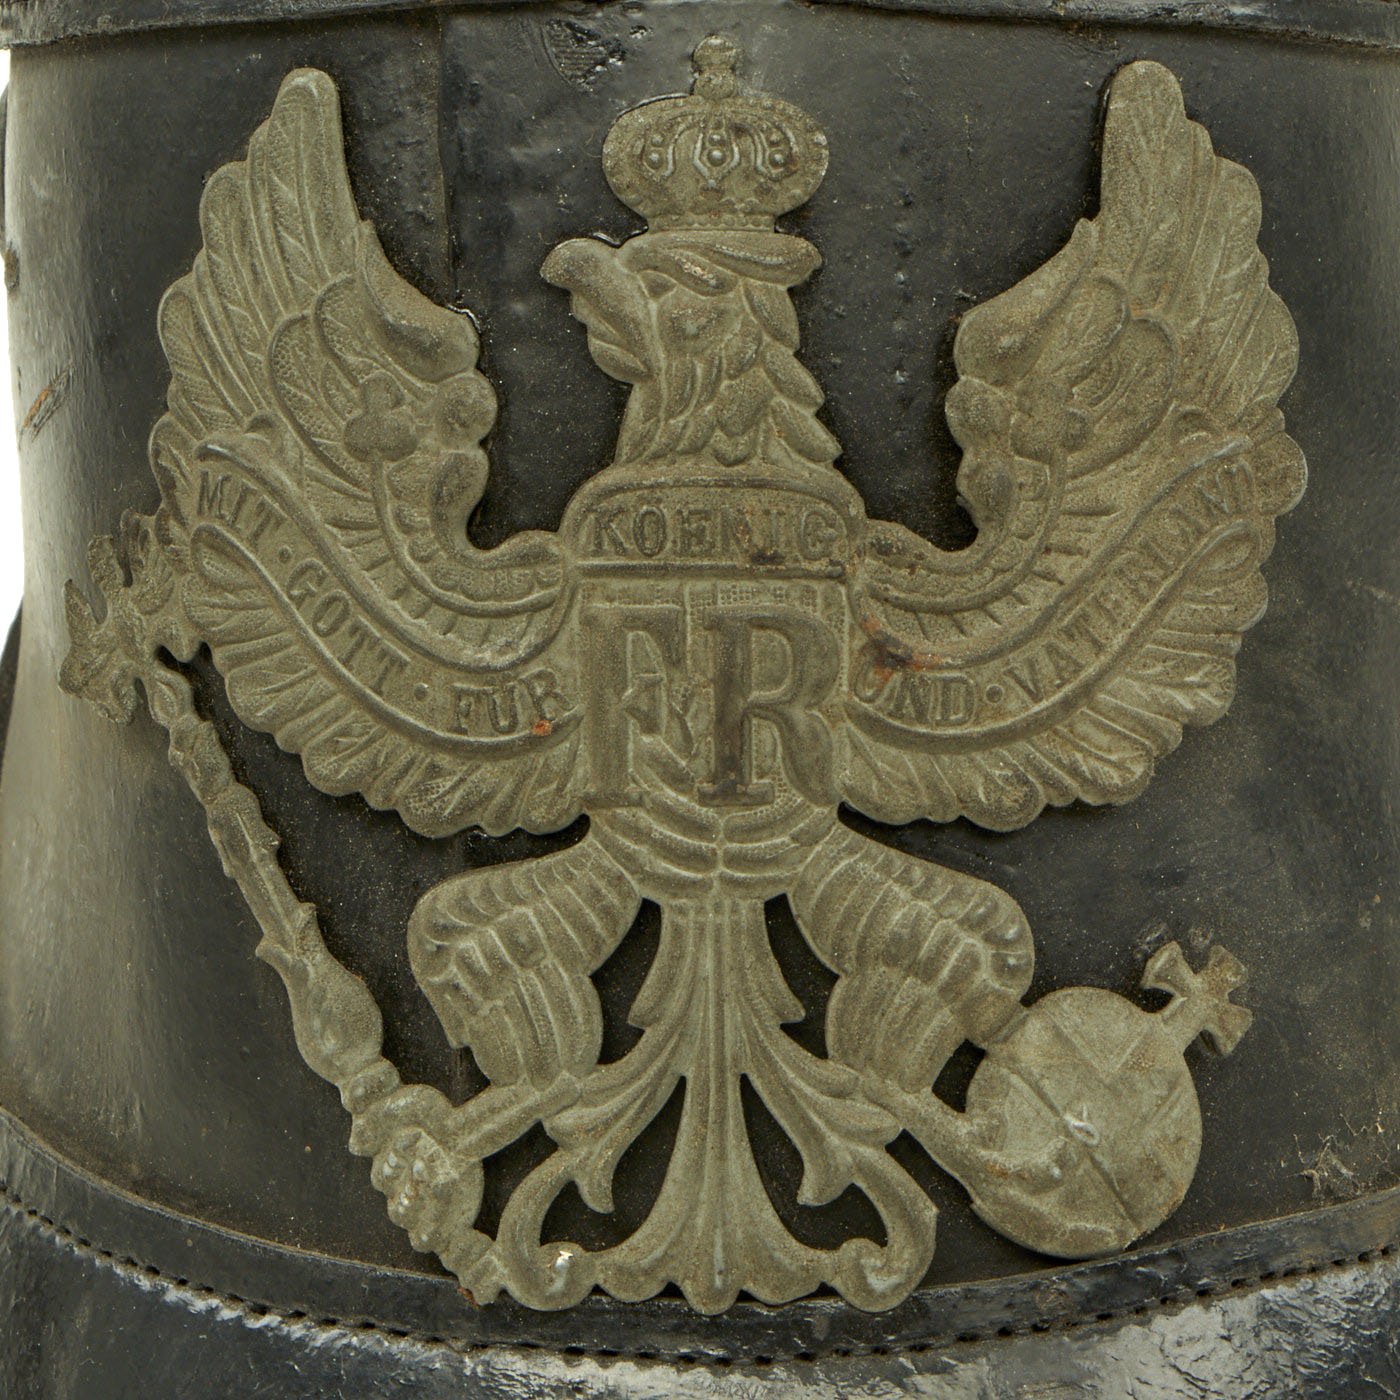 A wartime grey trim enlisted men's shako for Prussian units, Black leather  body, front and back visors. EM field-grey Prussian eagle front plate  attached by two loops with leather inserts, black and